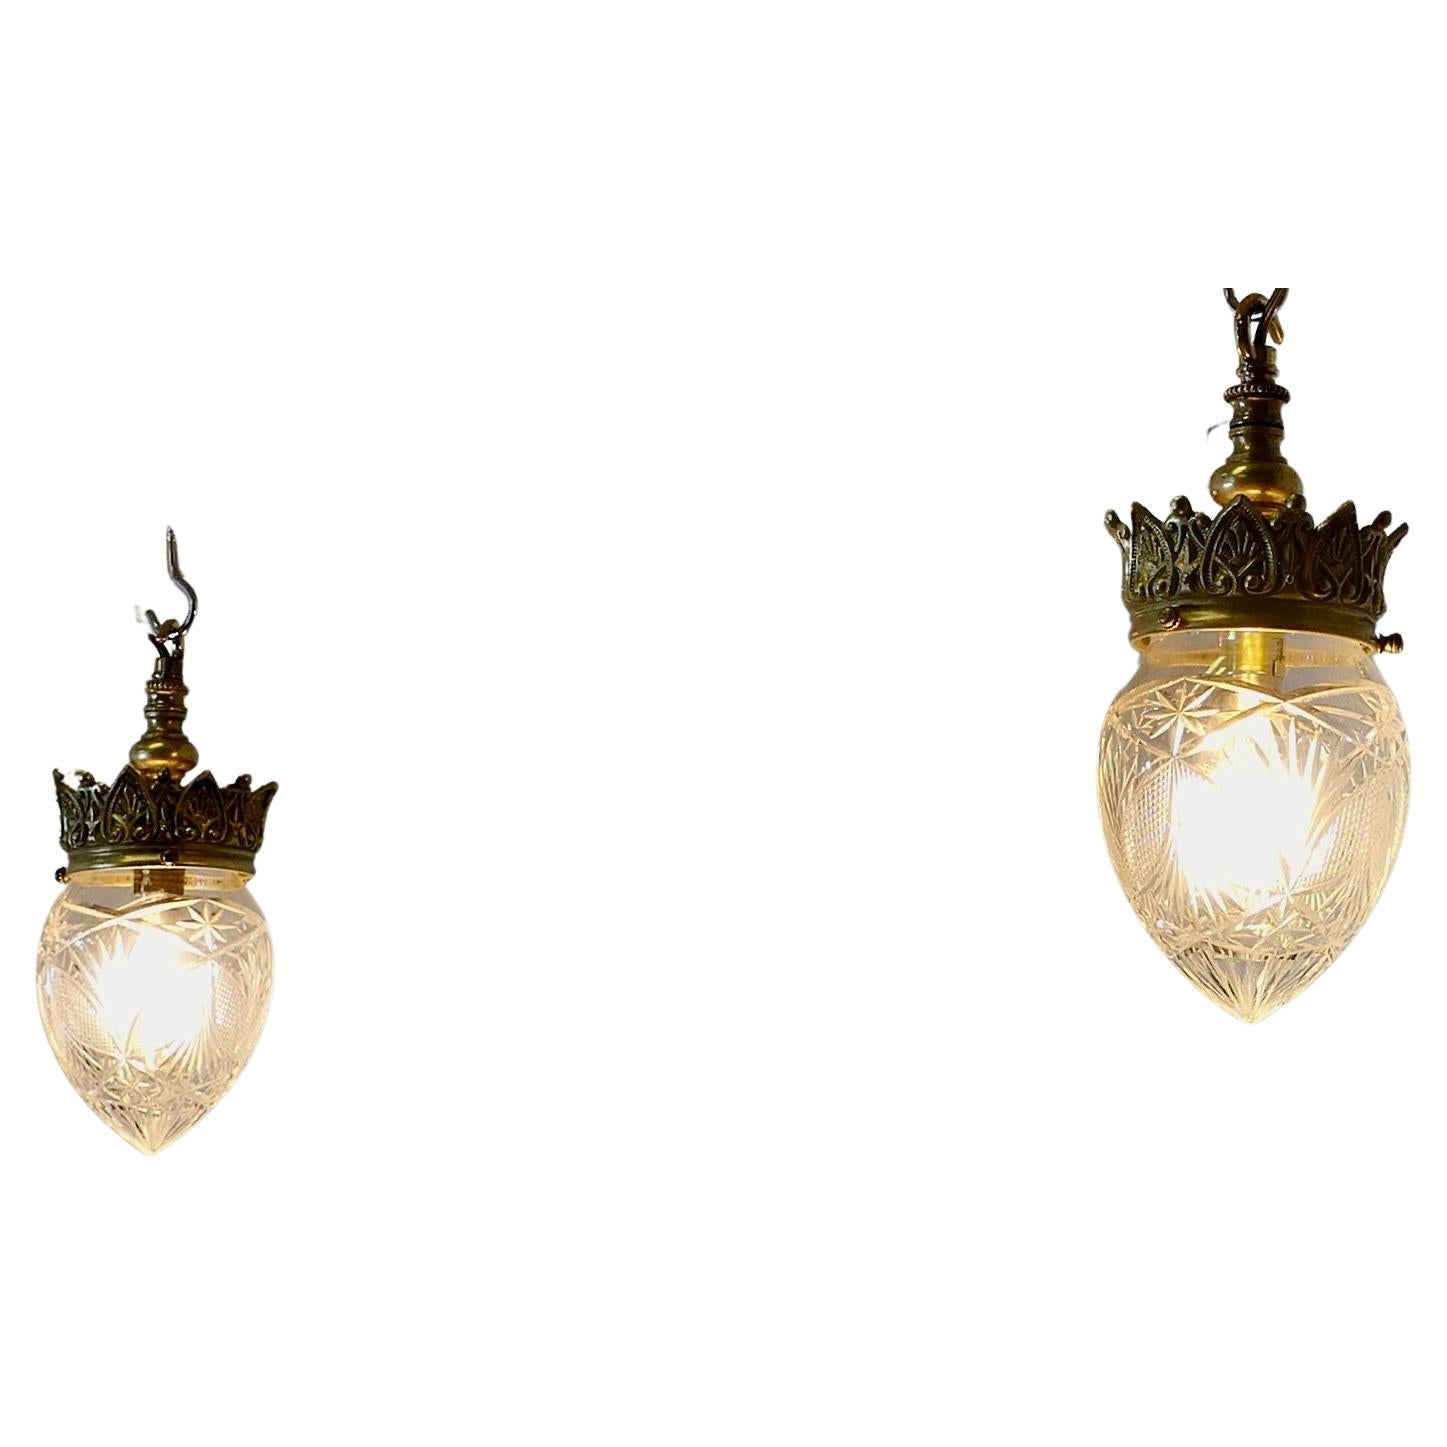  A Pair of Victorian Arts and Crafts Brass Ceiling Lights    For Sale